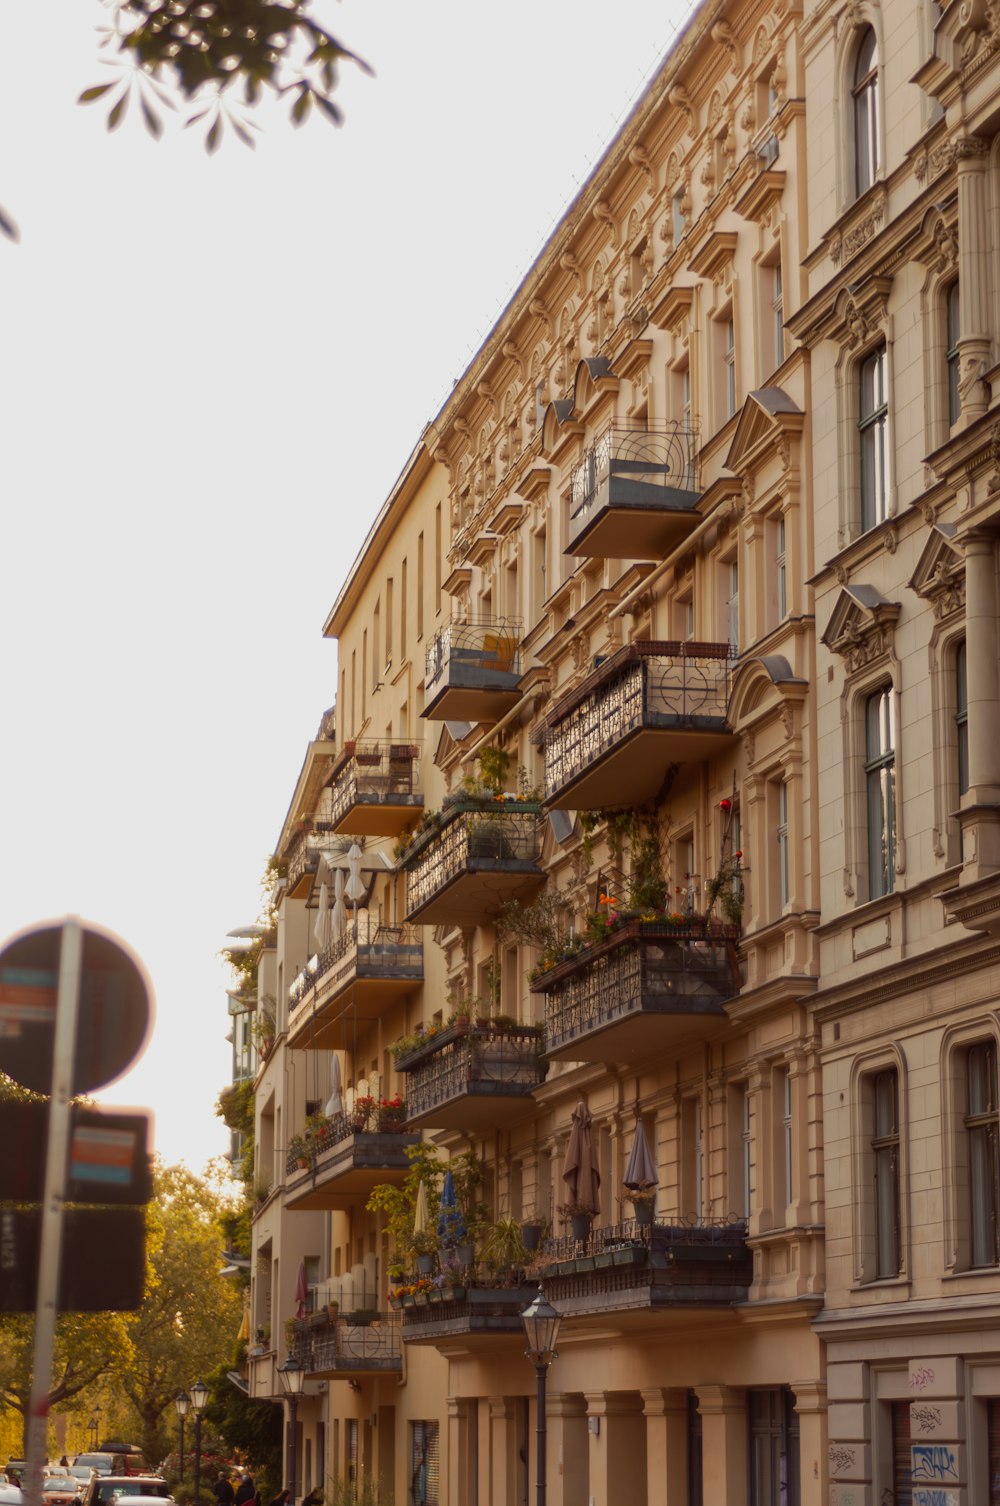 a building with balconies and balconies on the balconies